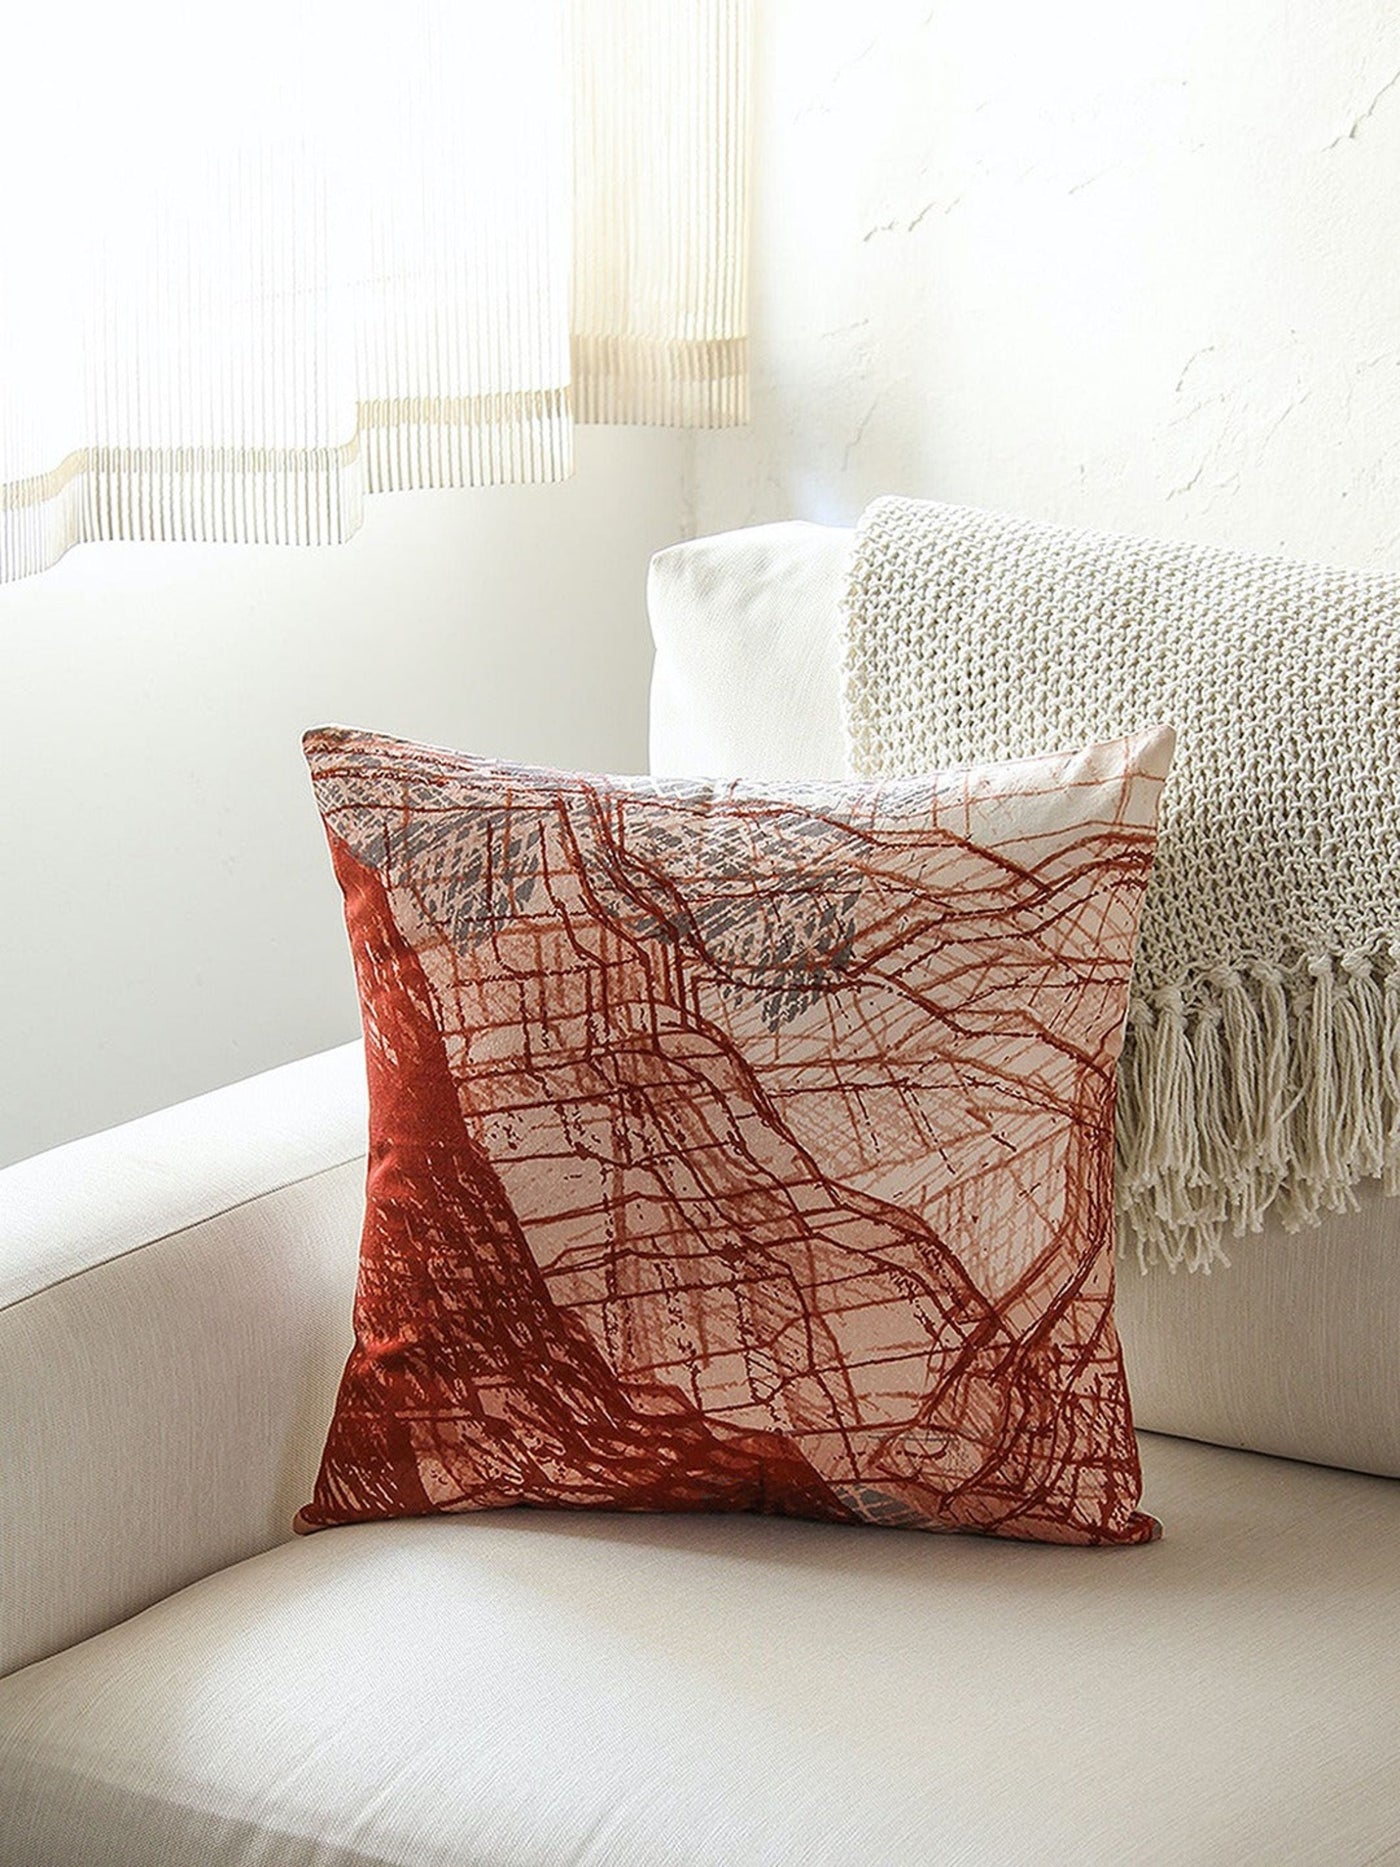 Cushion Cover - Arizona Sketchy Cotton 2 s-Red-8903773001026